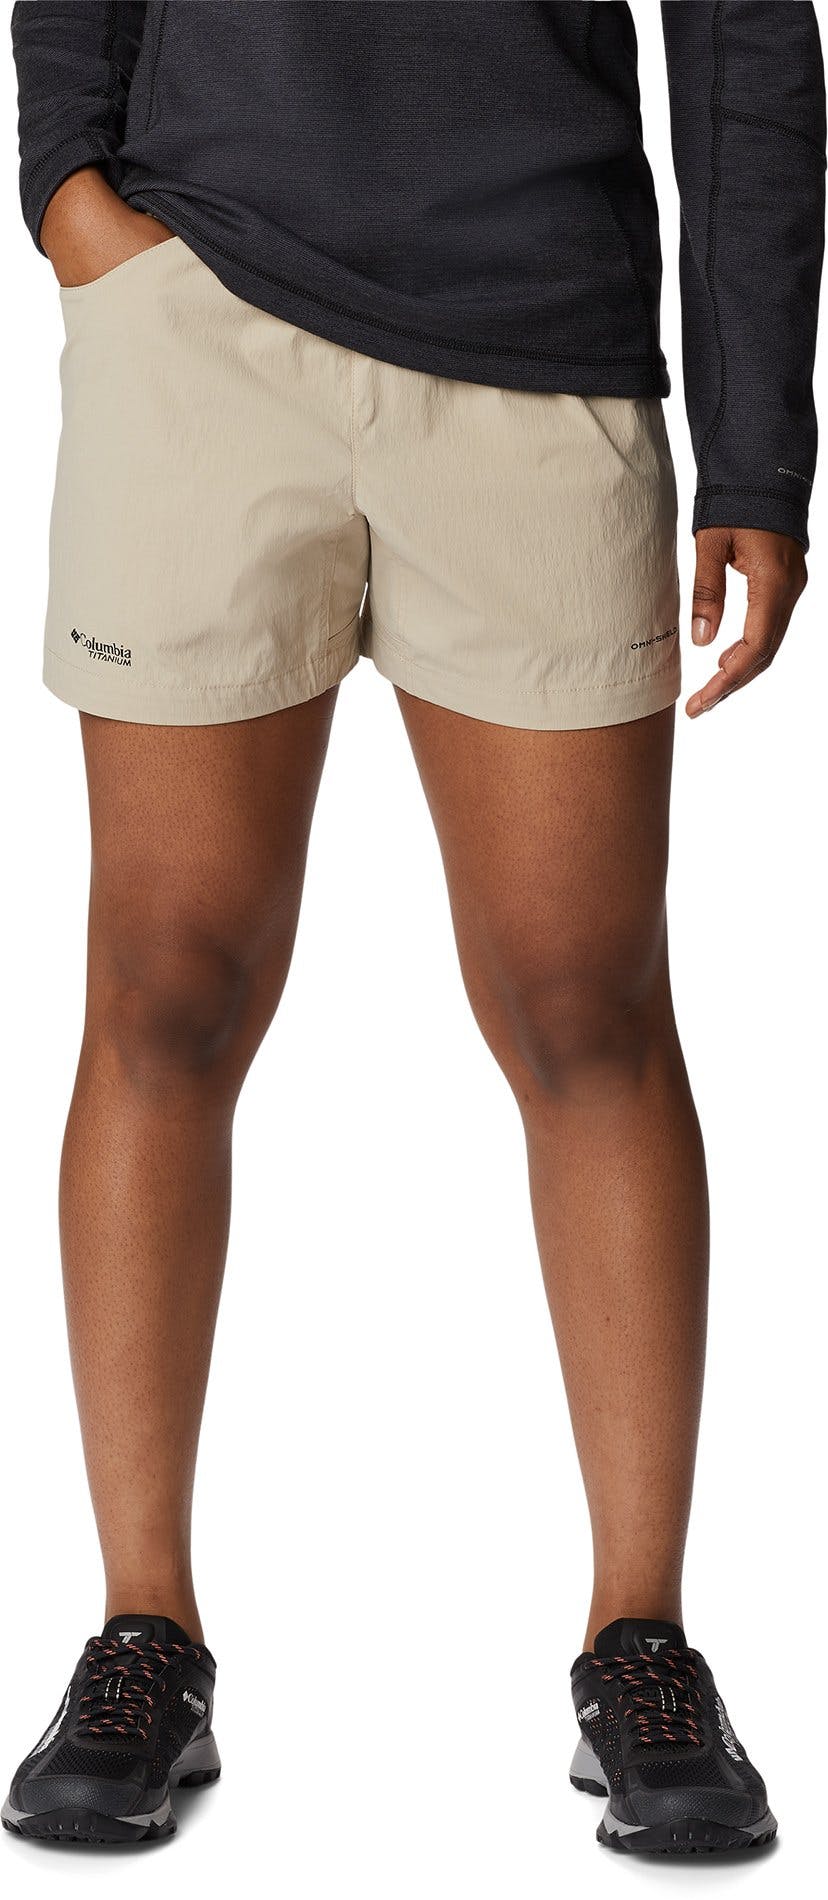 Product image for Titan Pass Lightweight Hiking Shorts - Women's